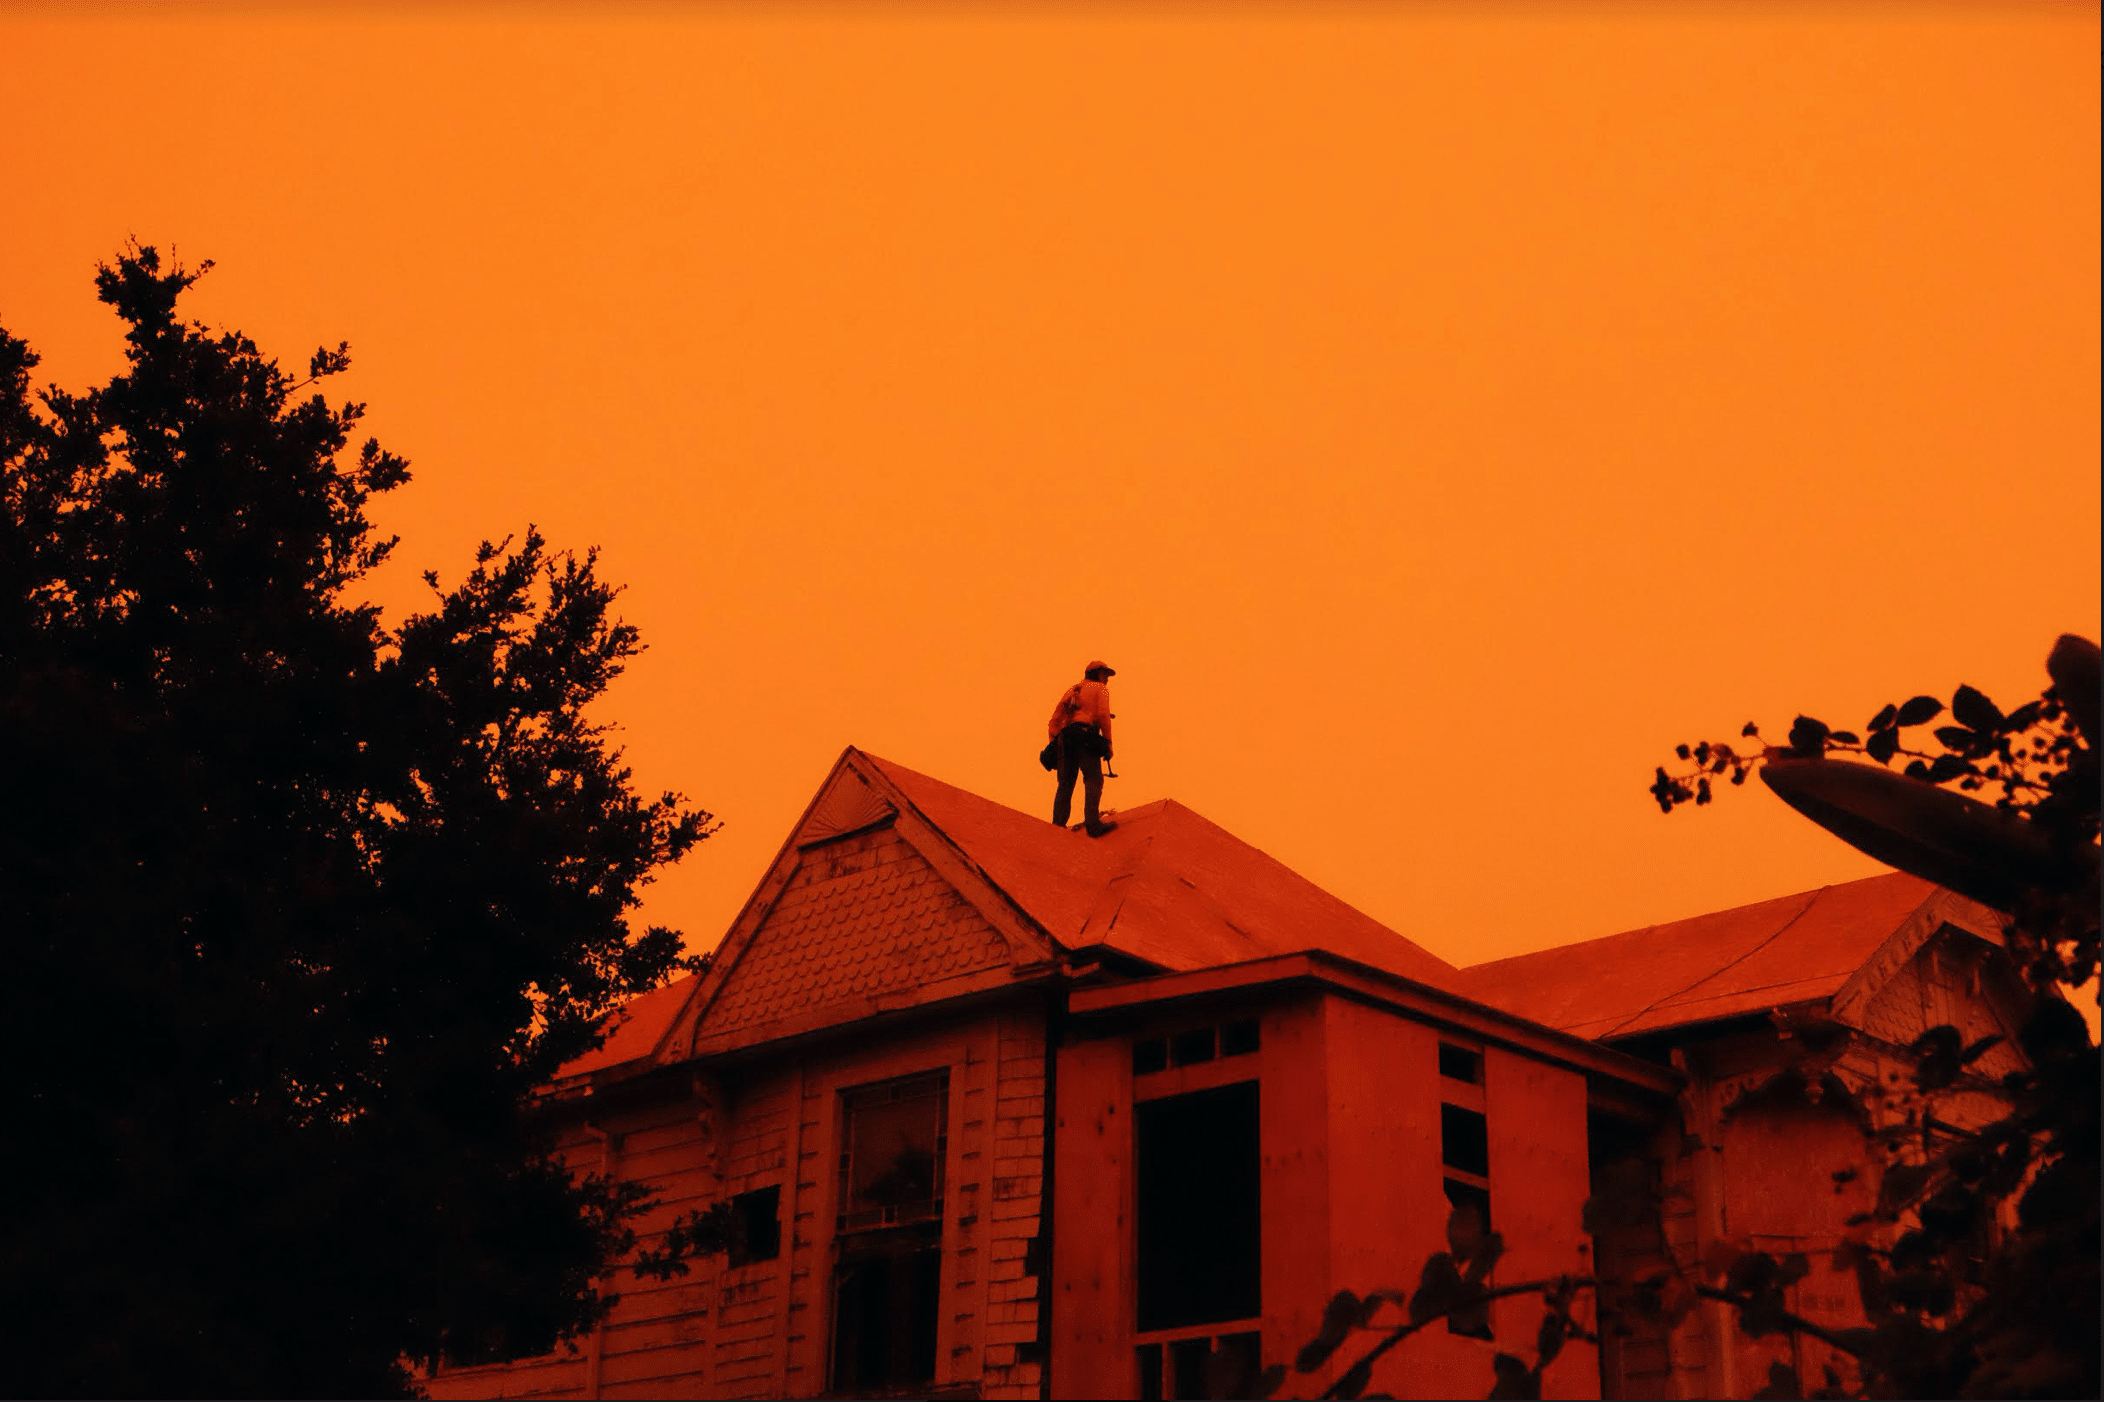 a man standing on the roof of a house in orange light